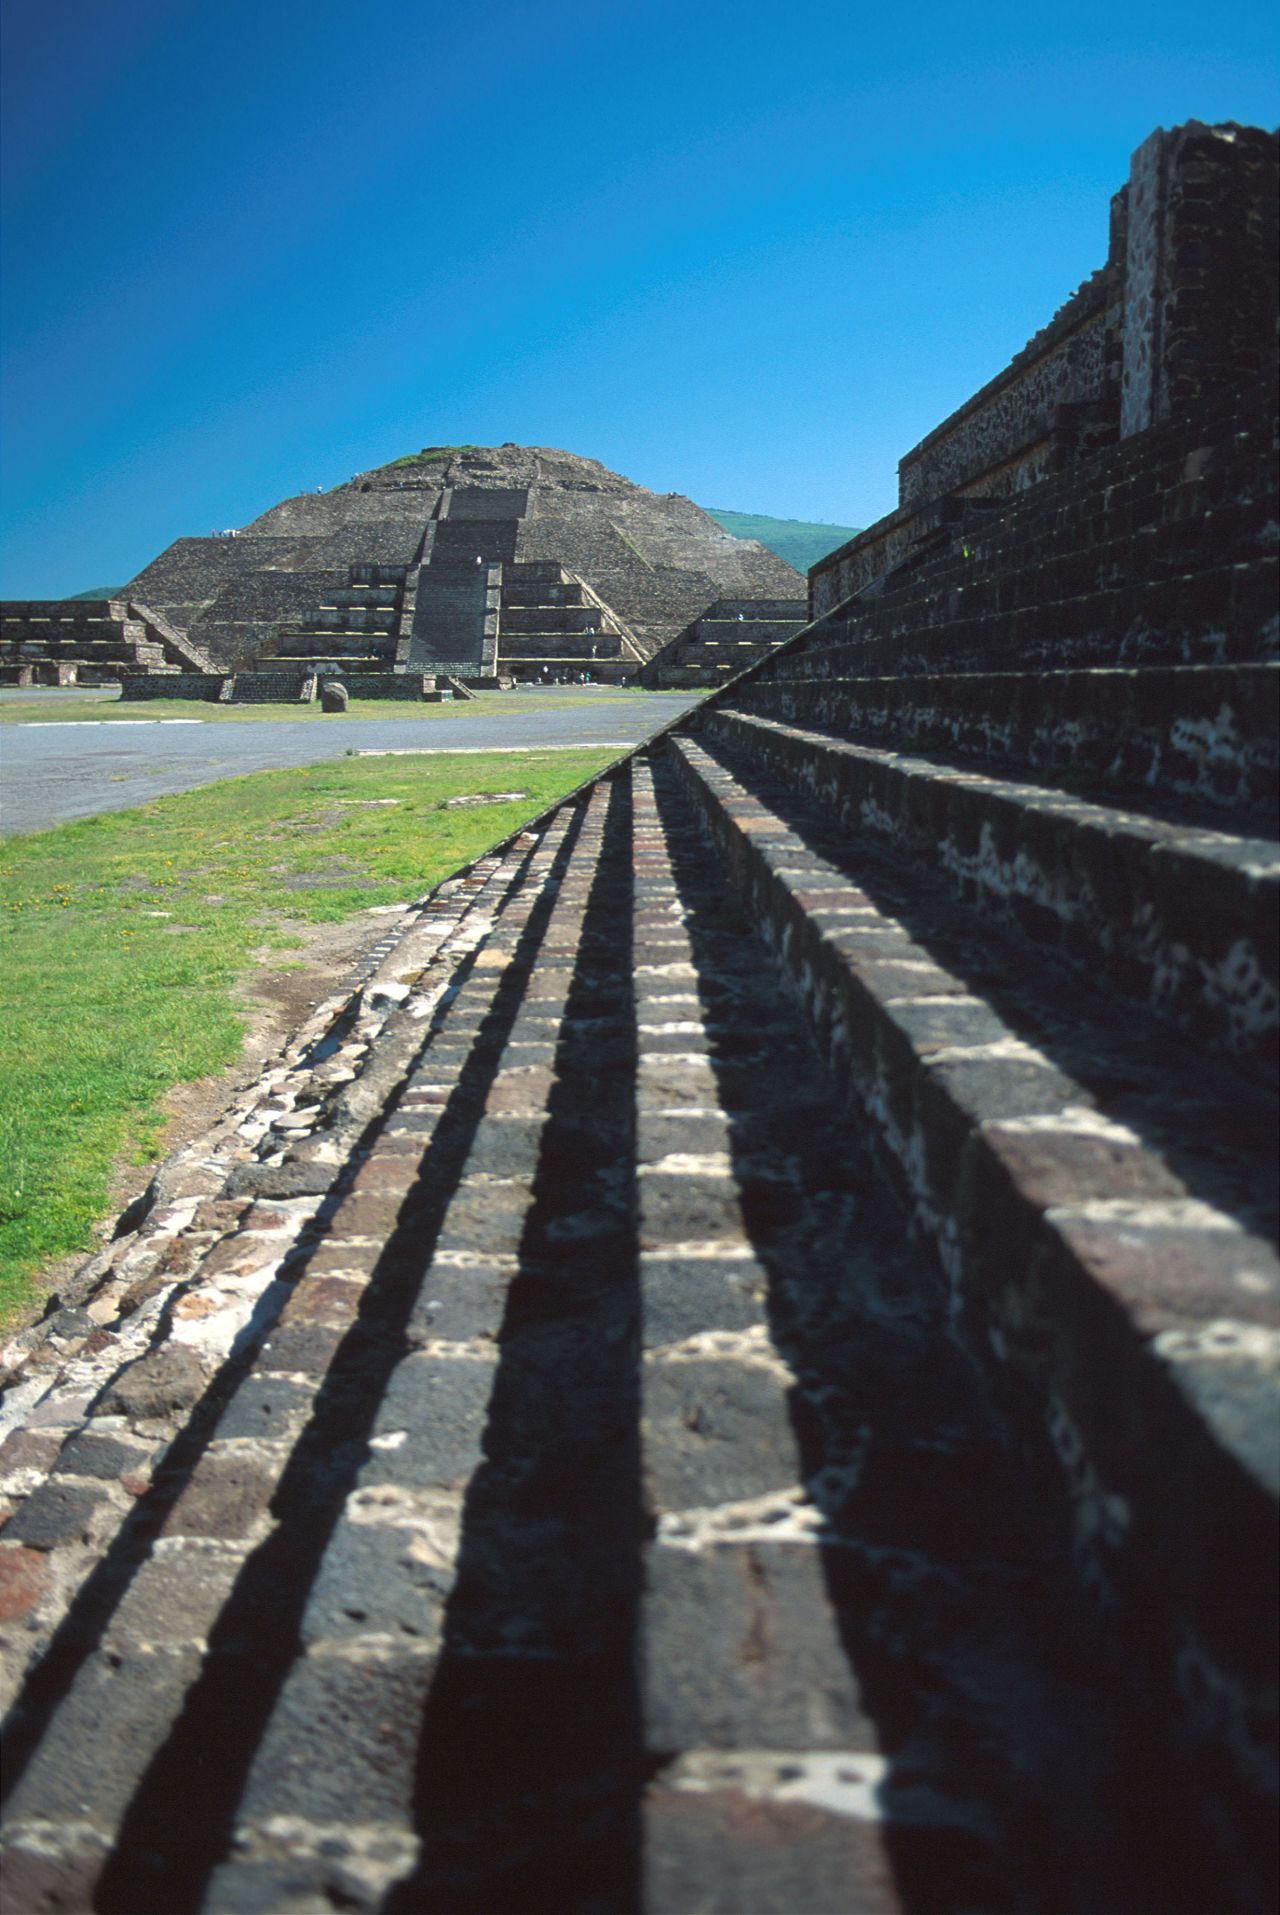 Teotihuacan is an Aztec name meaning "the place where men become Gods."<br />It was the largest city in the pre-Columbian Americas. The most famous structure is the Pyramid of the Sun, which was built in two phases. The second phase took its height to 224 meters, making it the third-tallest pyramid in the world. The entire city originally covered around 20 square kilometers (eight square miles) and was home to 2,200 structures, built with stone and lime plaster. <strong>Completion date:</strong> 100 BC.